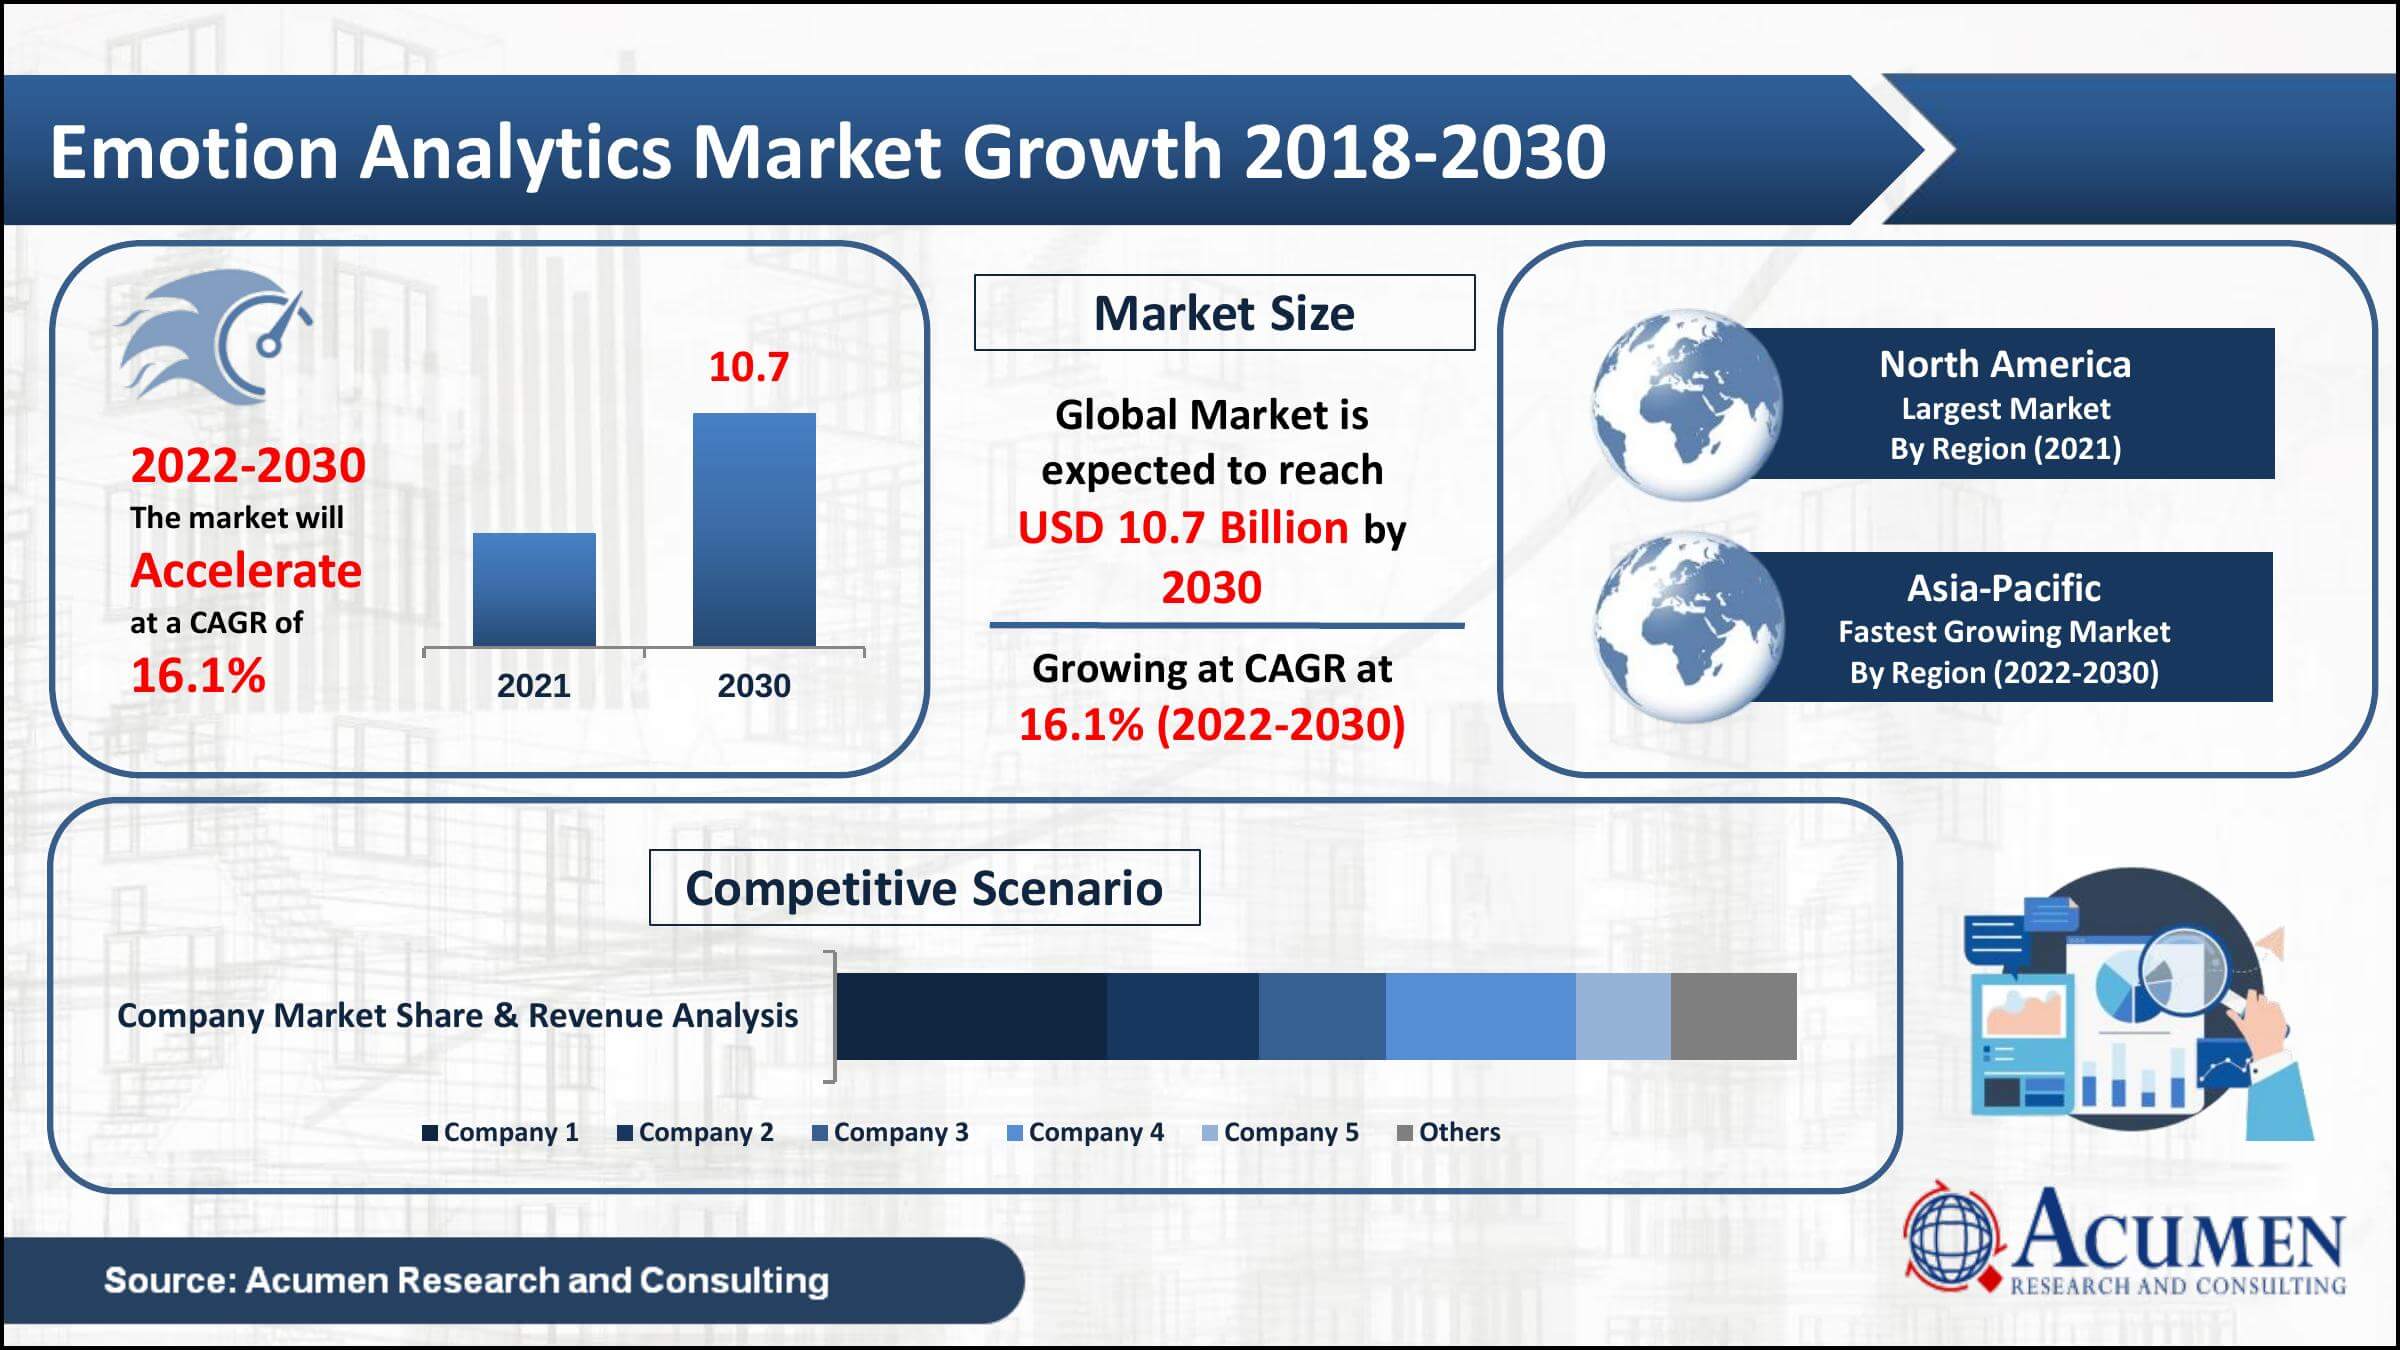 Emotion Analytics Marketvalue to reach USD 10.7 Billion by 2030 at CAGR of 16.1% as per Acumen Research and Consulting